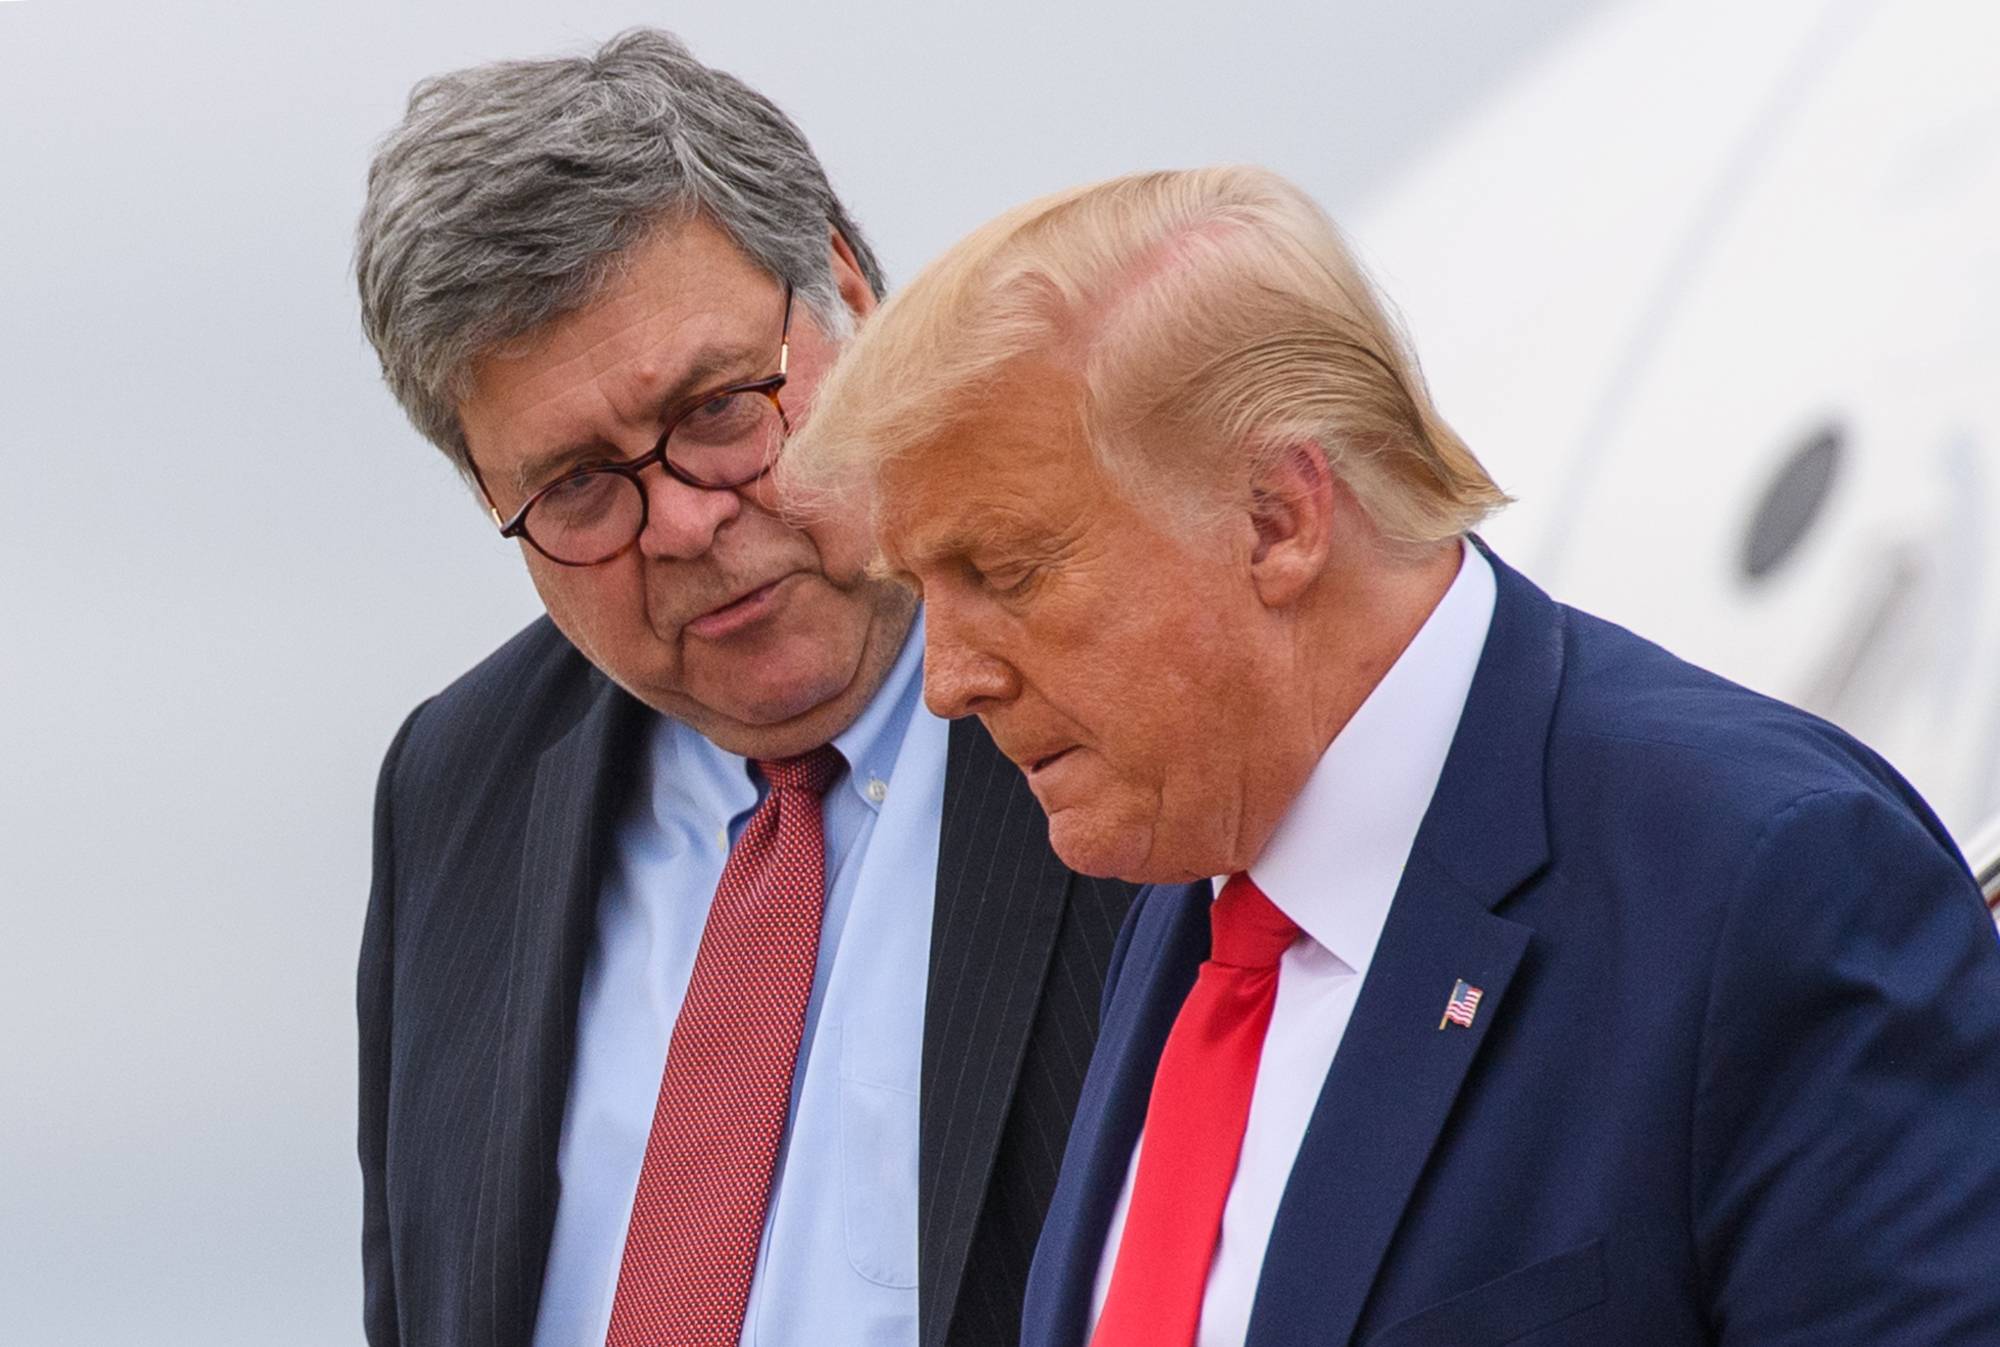 The Wall Street Journal reported that U.S. Attorney General William Barr last week suggested to federal prosecutors that they consider charging protesters with sedition — an archaic criminal charge that hasn’t been regularly used by federal authorities since the McCarthy era. | AFP-JIJ